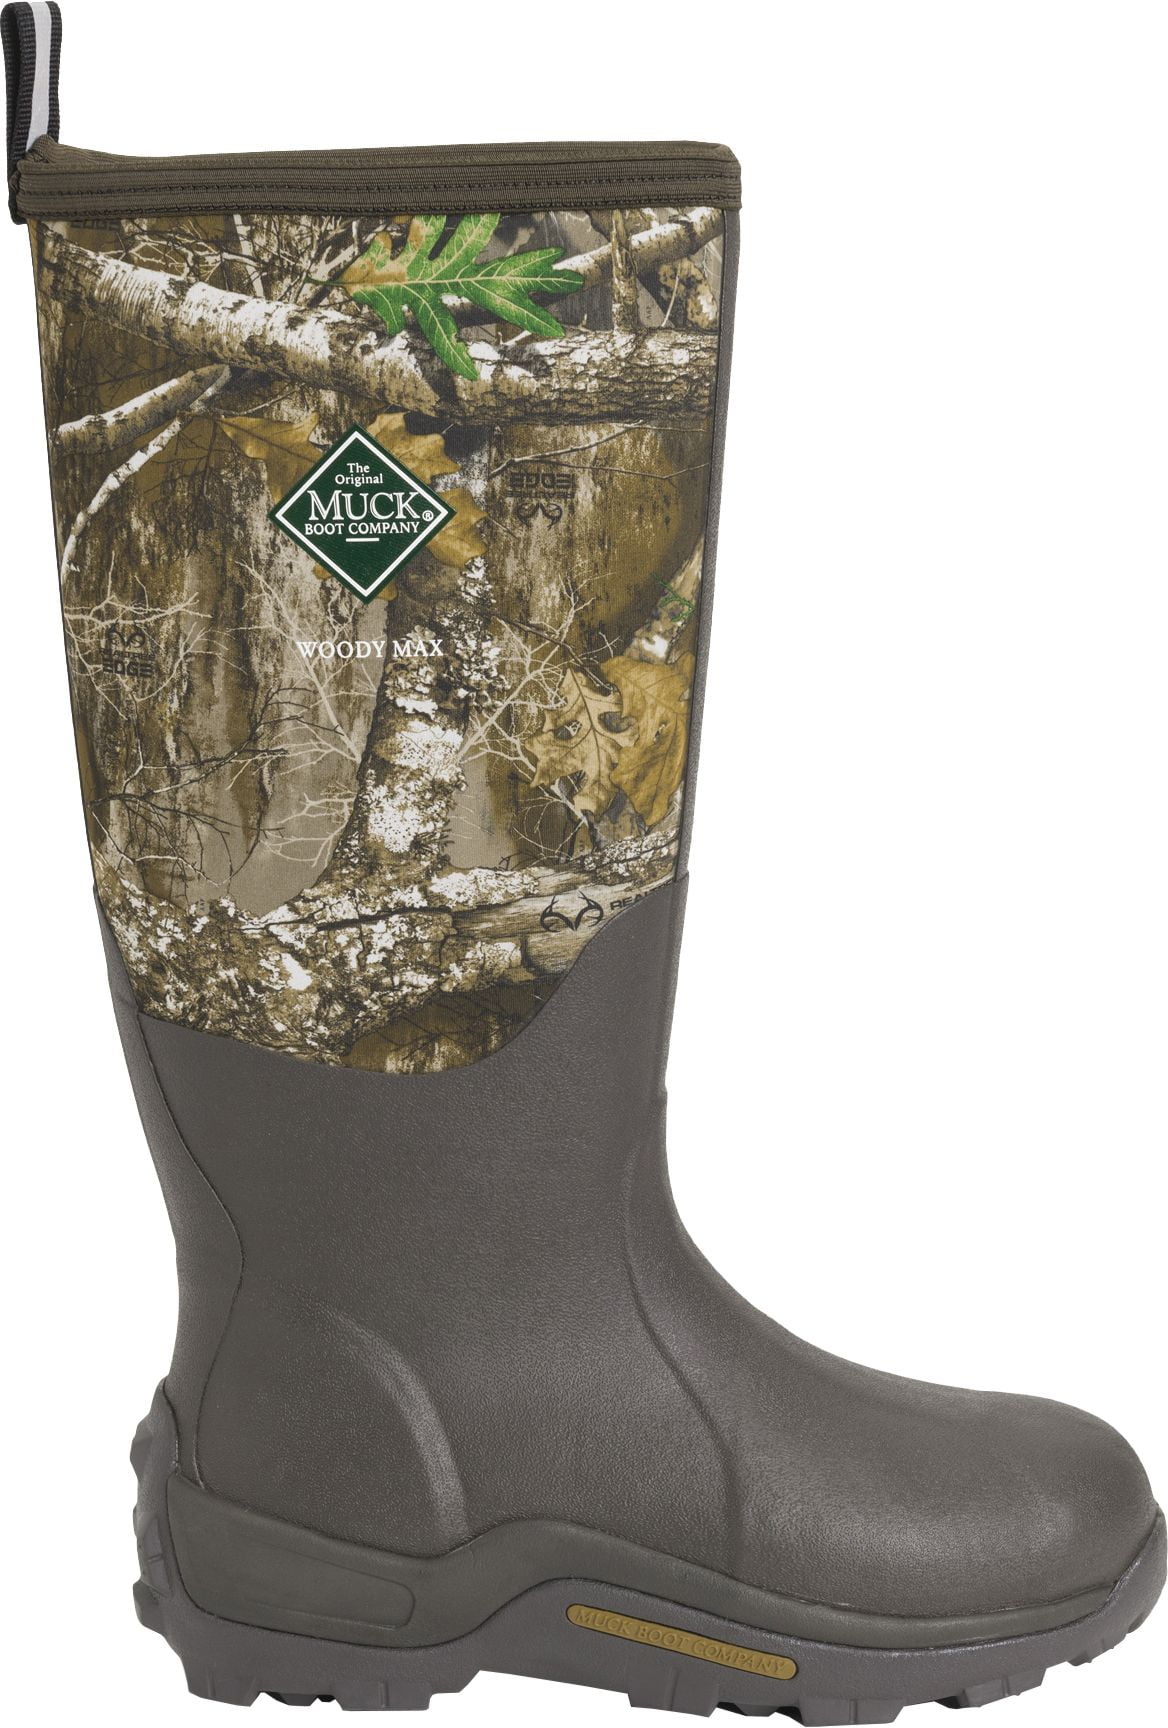 men's muck woody max hunting boots